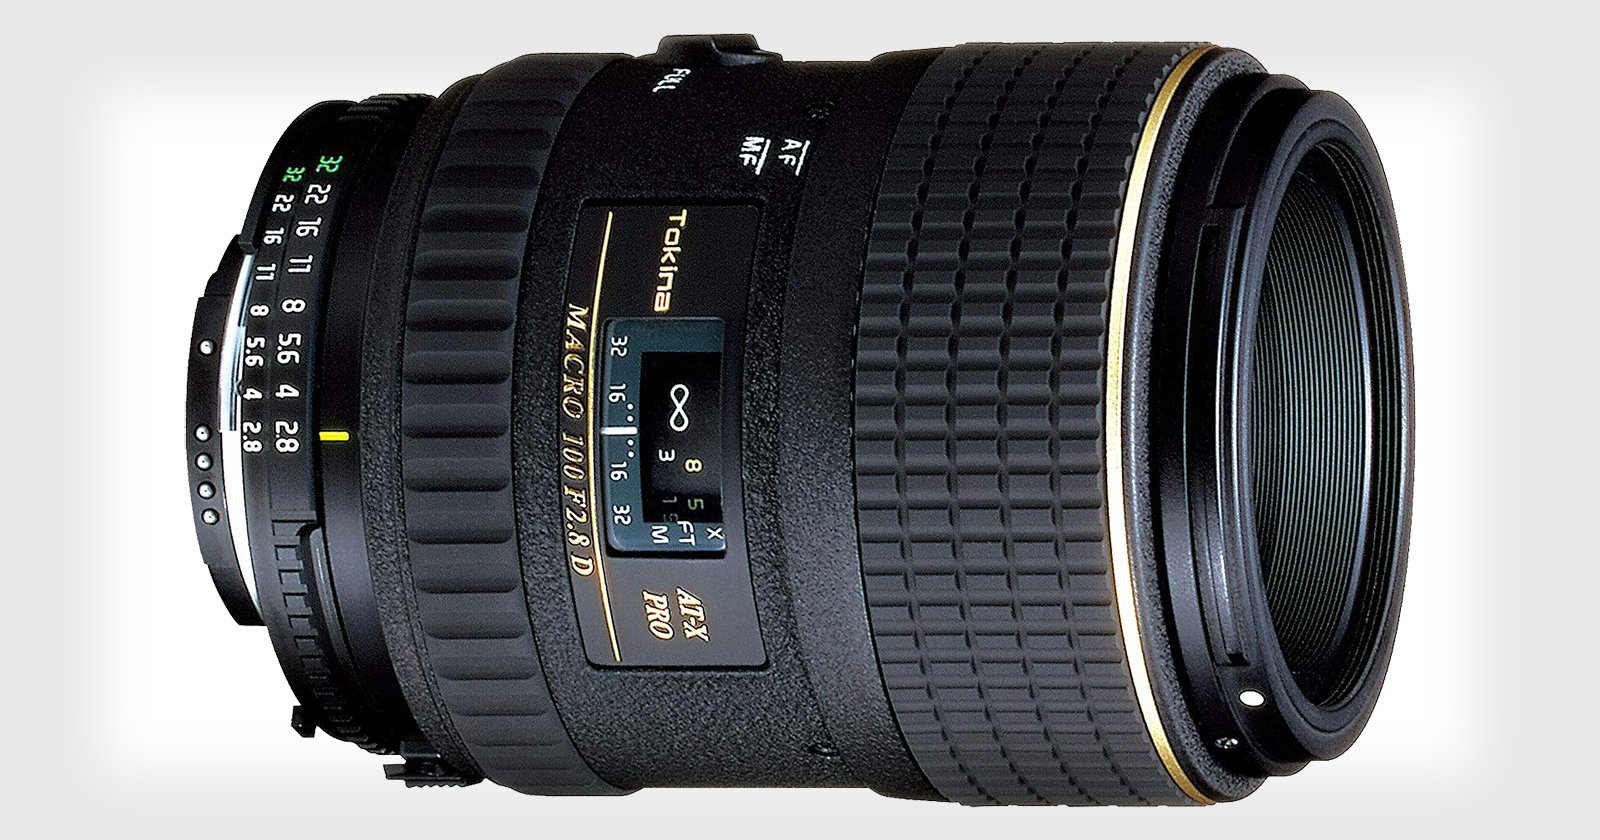 Tokina to Release a New 100mm f/2.8 Macro Lens for Canon and Nikon